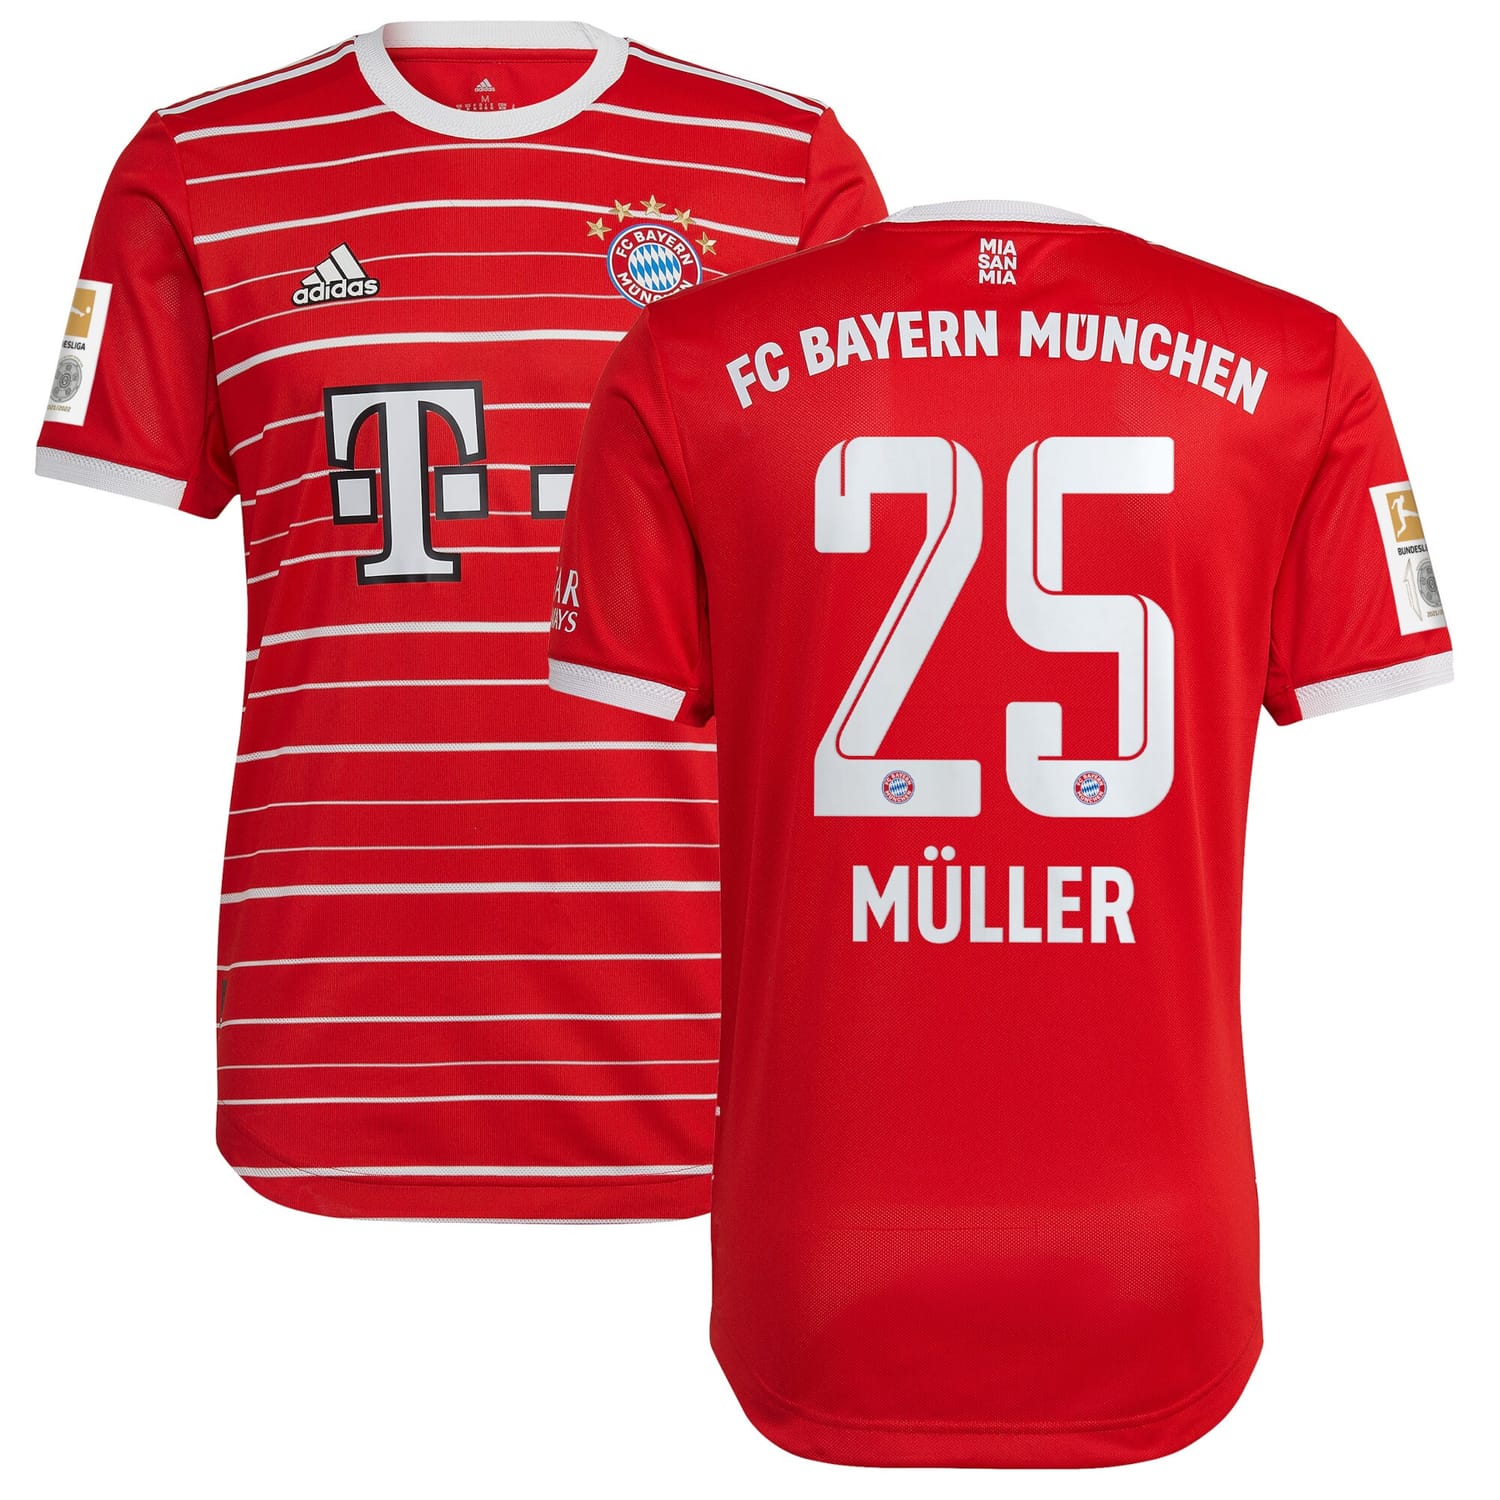 Bundesliga Bayern Munich Home Authentic Jersey Shirt Red 2022-23 player Thomas Müller printing for Men